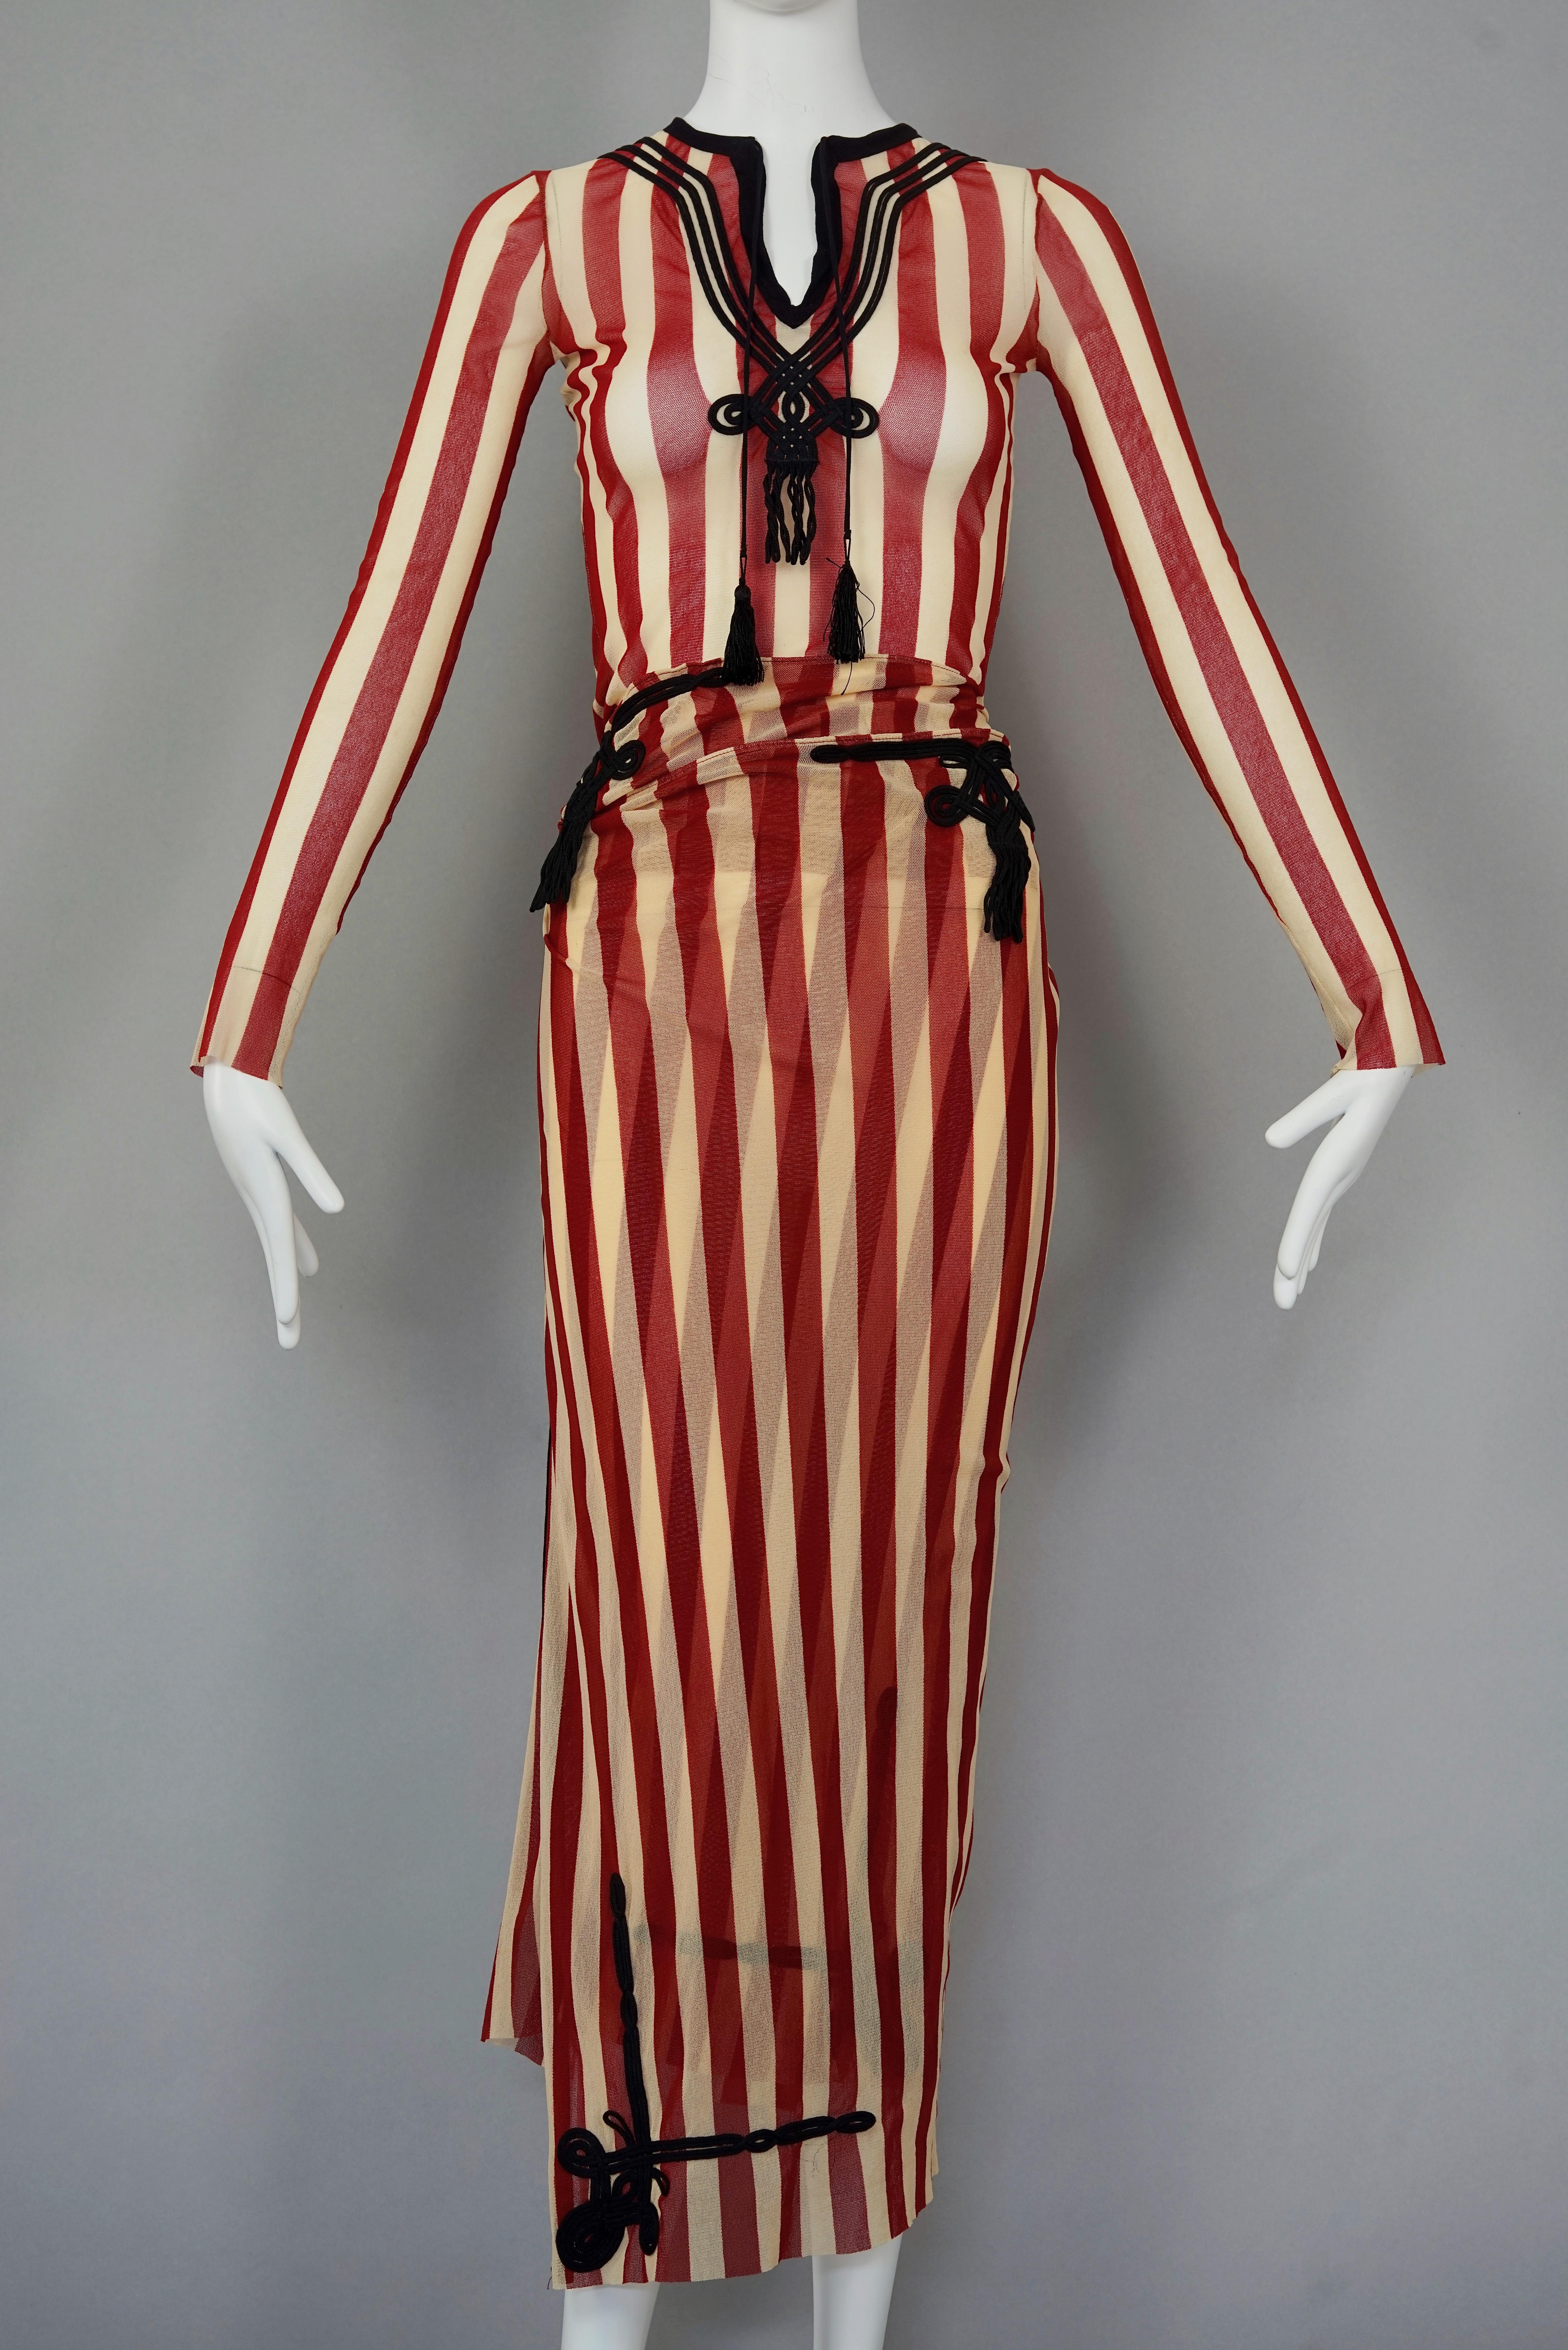 Vintage JEAN PAUL GAULTIER Stripe Passementerie Tassel Sheer Top and Pareo Set

Measurements taken laid flat, double bust and waist:
Shoulders: 13.78 inches (35 cm) without stretching
Sleeves: 24.80 inches (63 cm)
Bust: 15.75 inches (40 cm) without